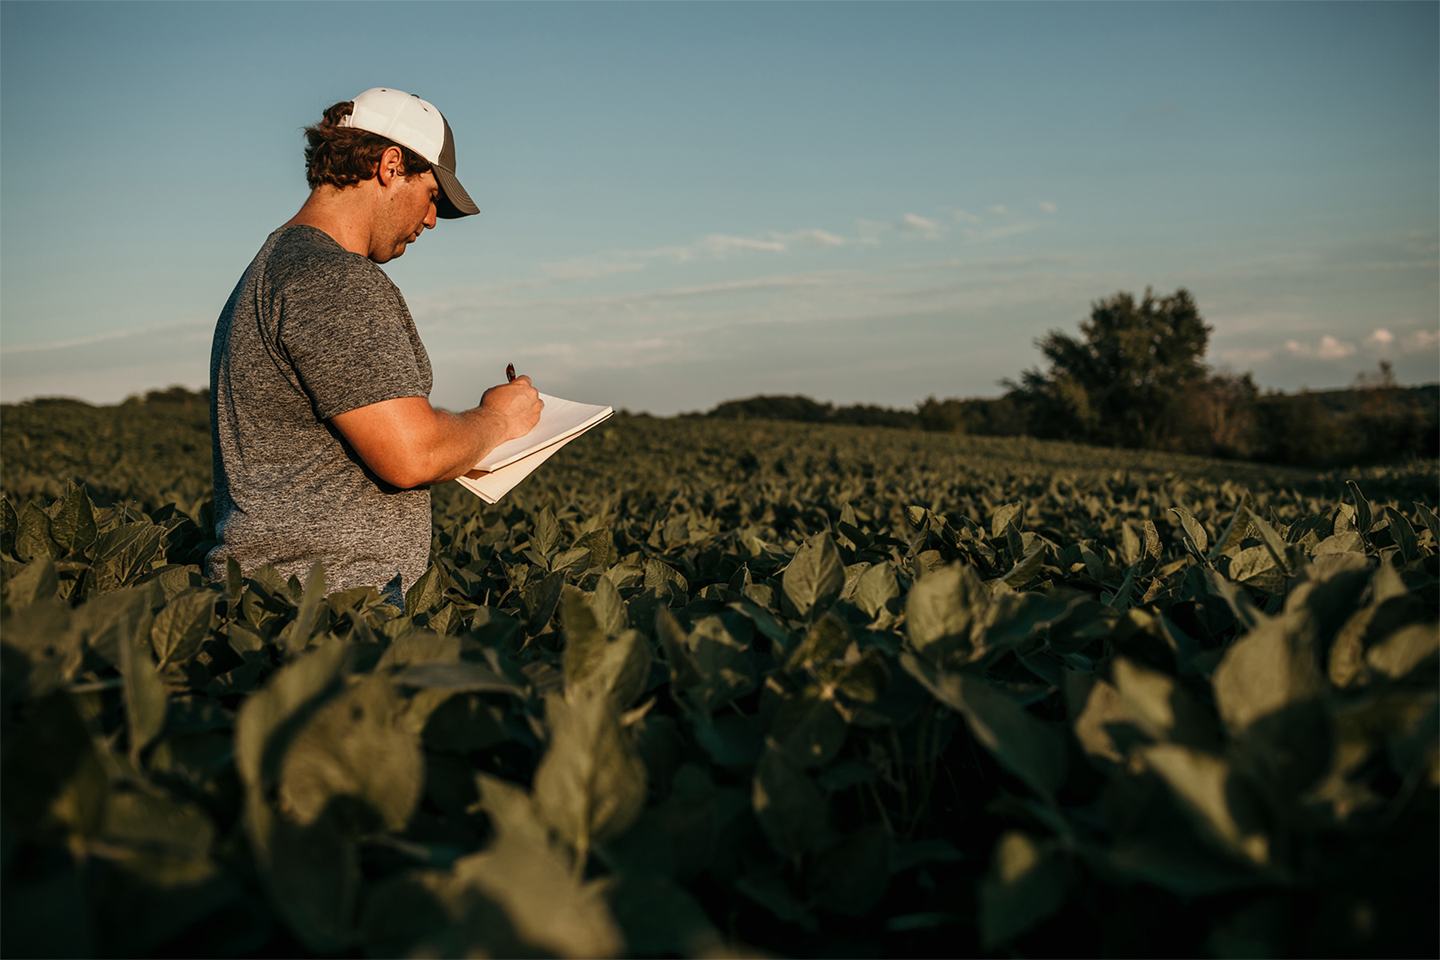 Man with notebook in a field.